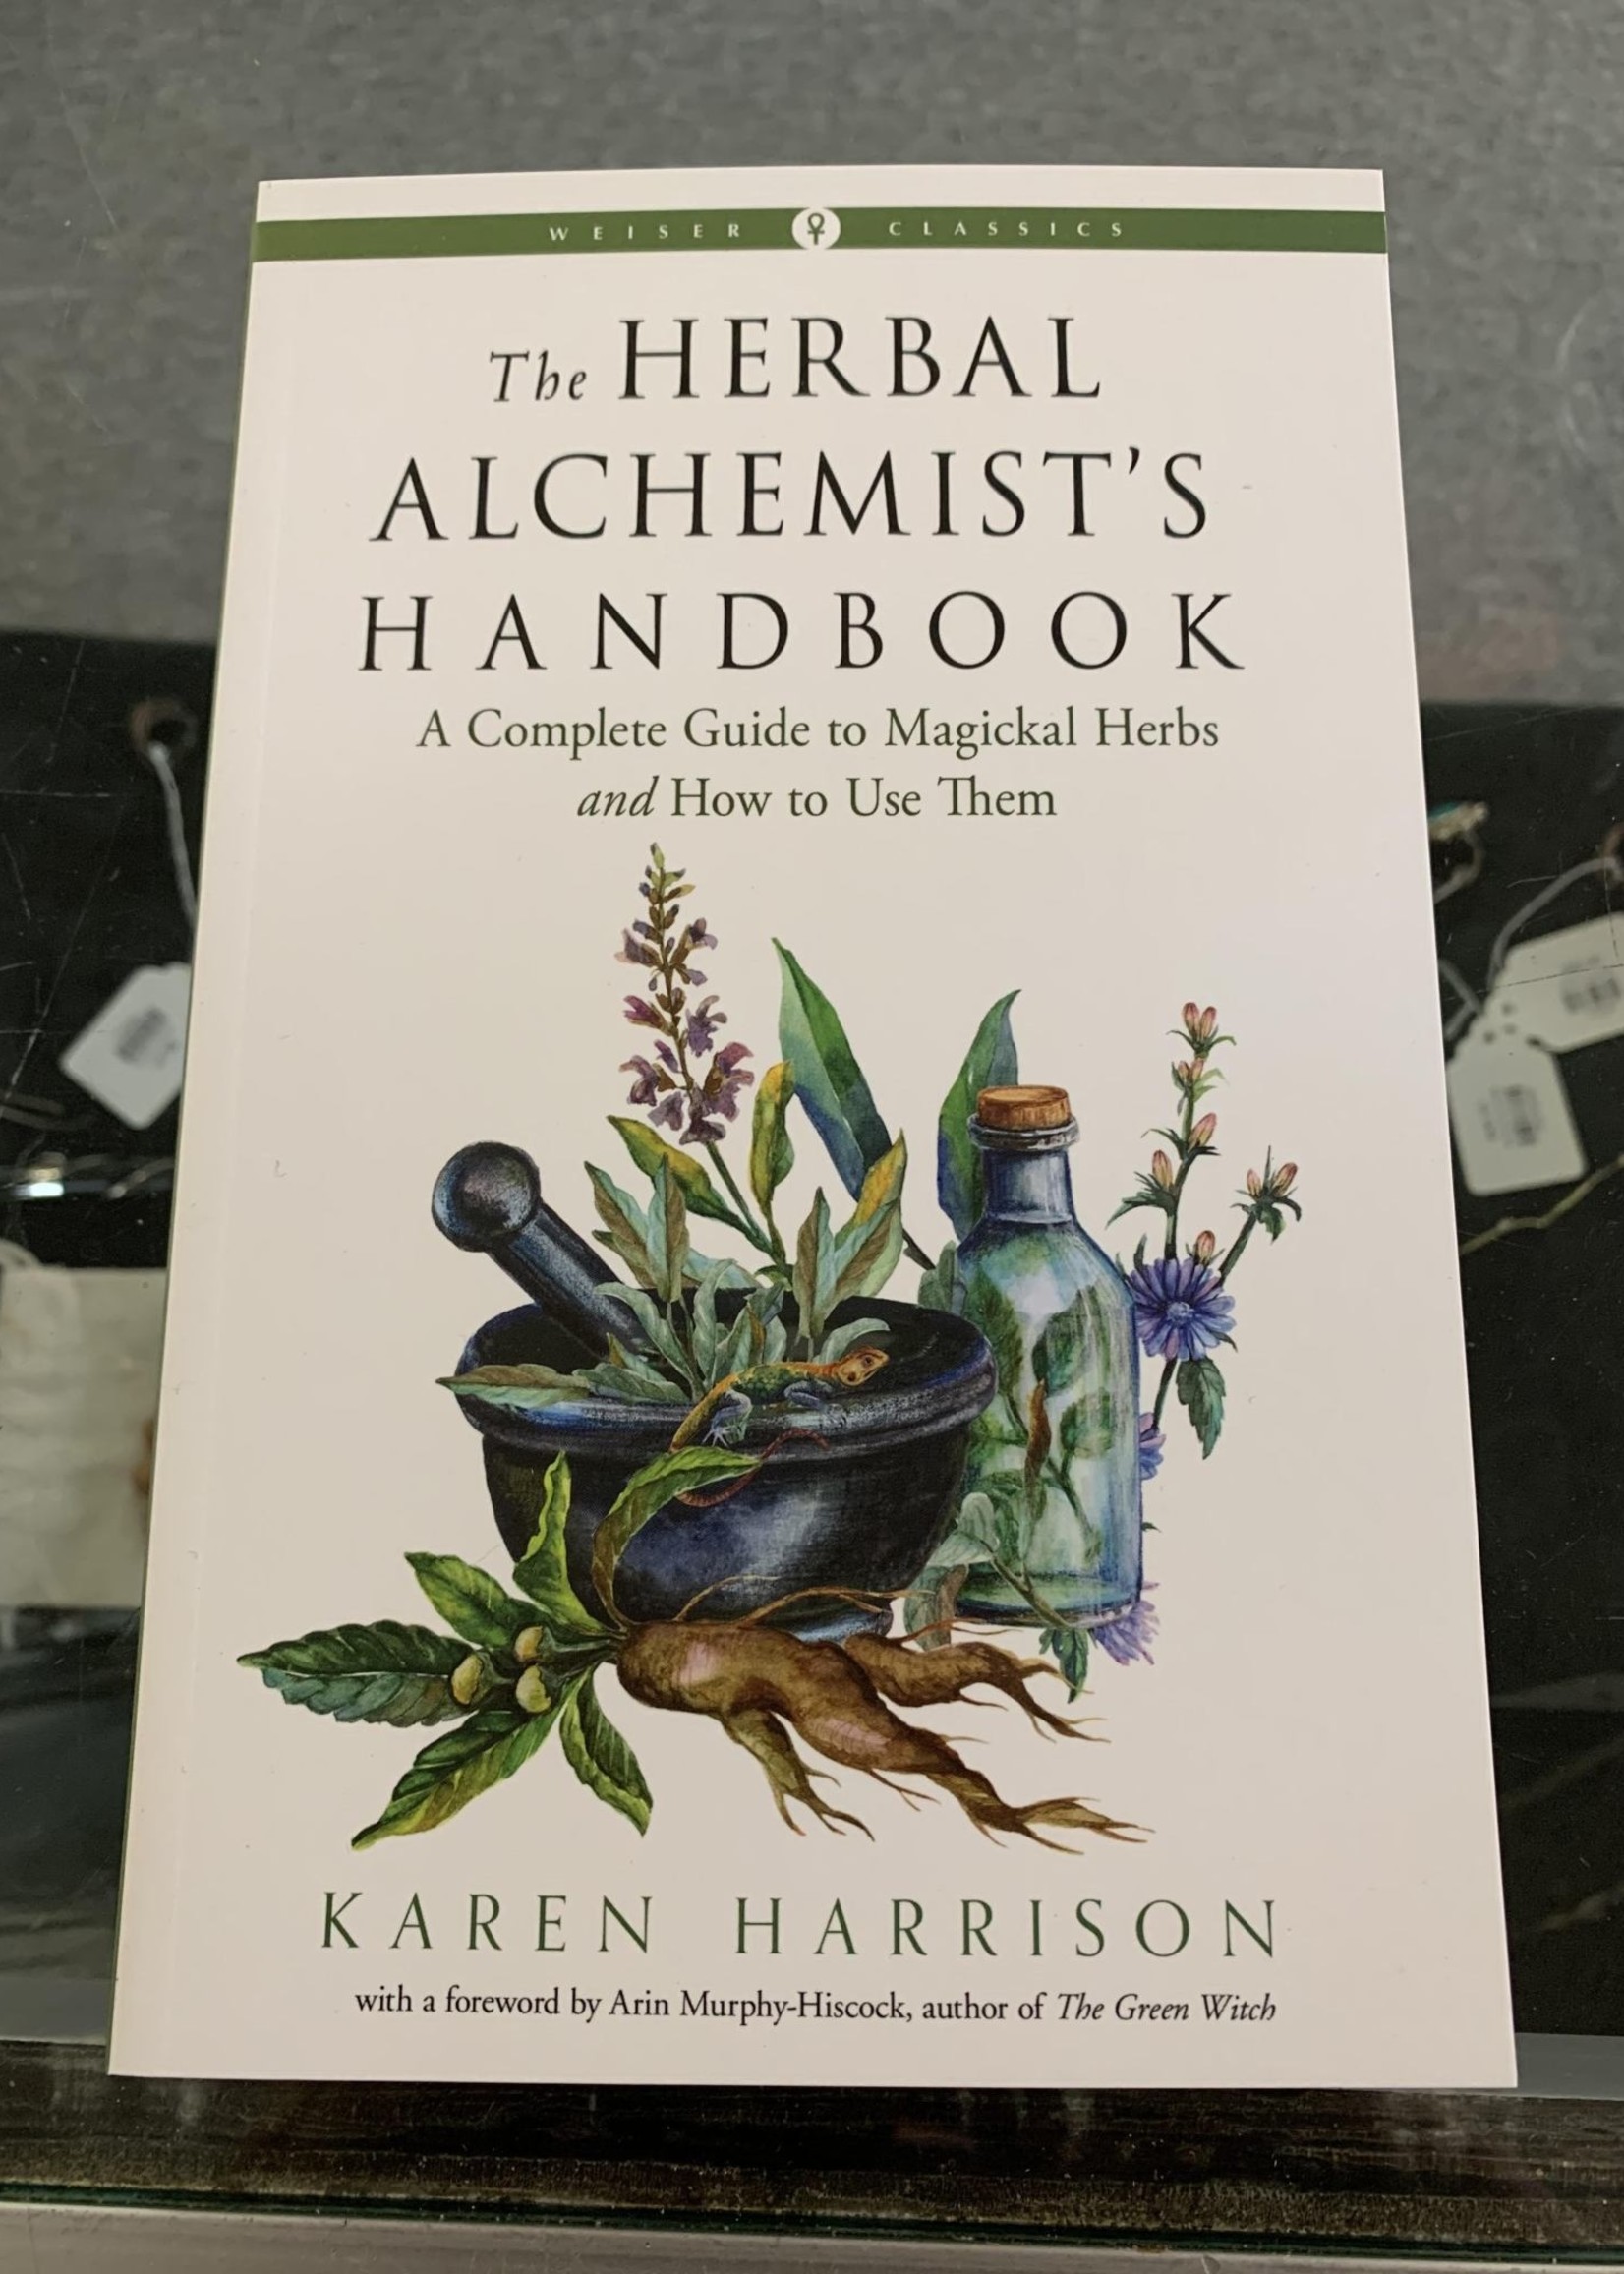 The Herbal Alchemist's Handbook (Weiser Classics Edition) A Complete Guide to Magickal Herbs and How to Use Them - Karen Harrison